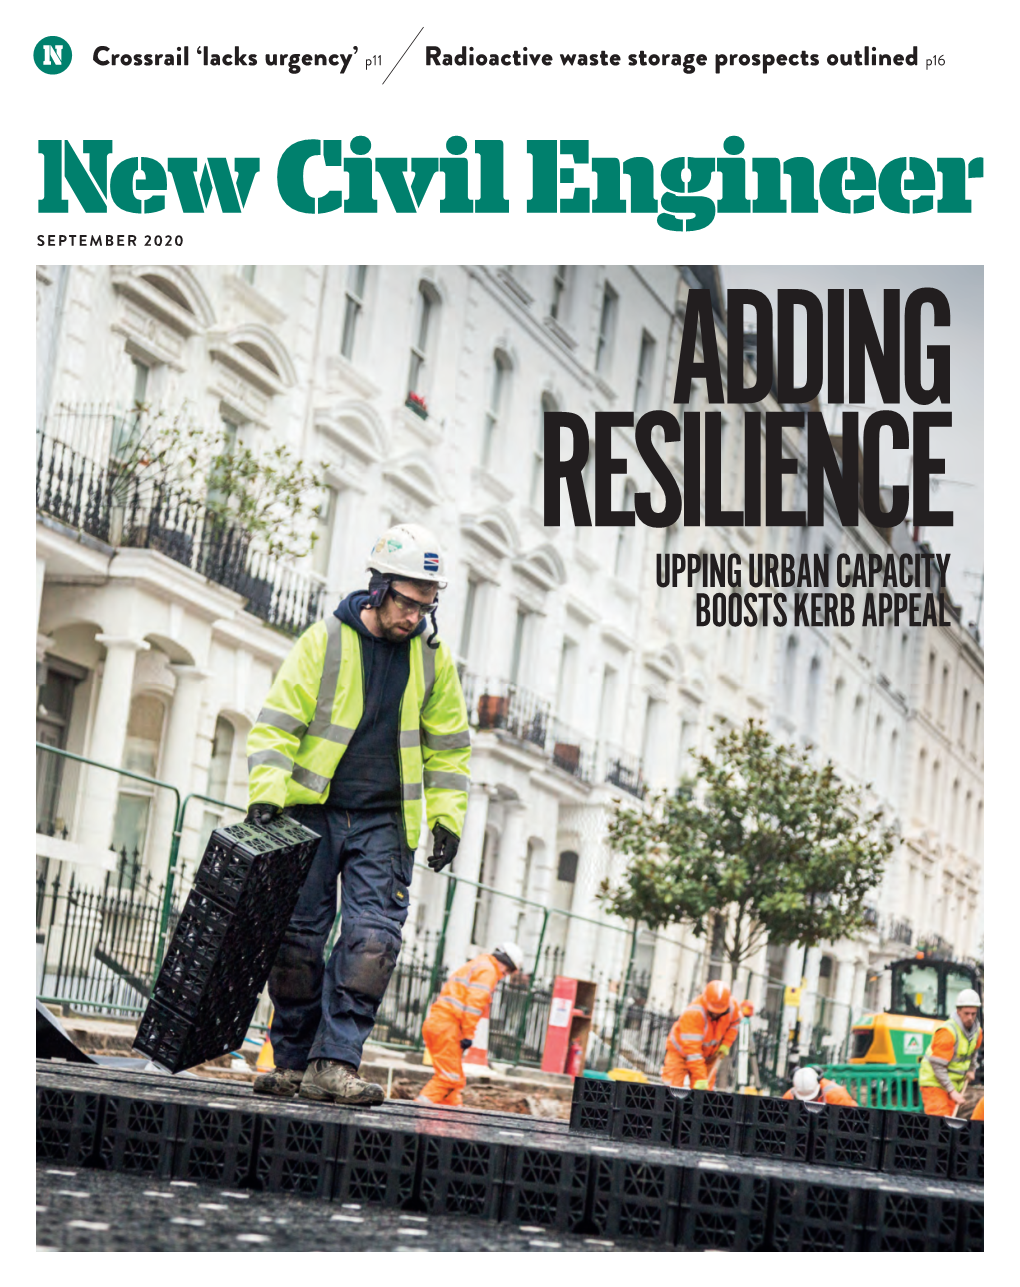 New Civil Engineer SEPTEMBER 2020 ADDING RESILIENCE UPPING URBAN CAPACITY BOOSTS KERB APPEAL Q-BIC PLUS